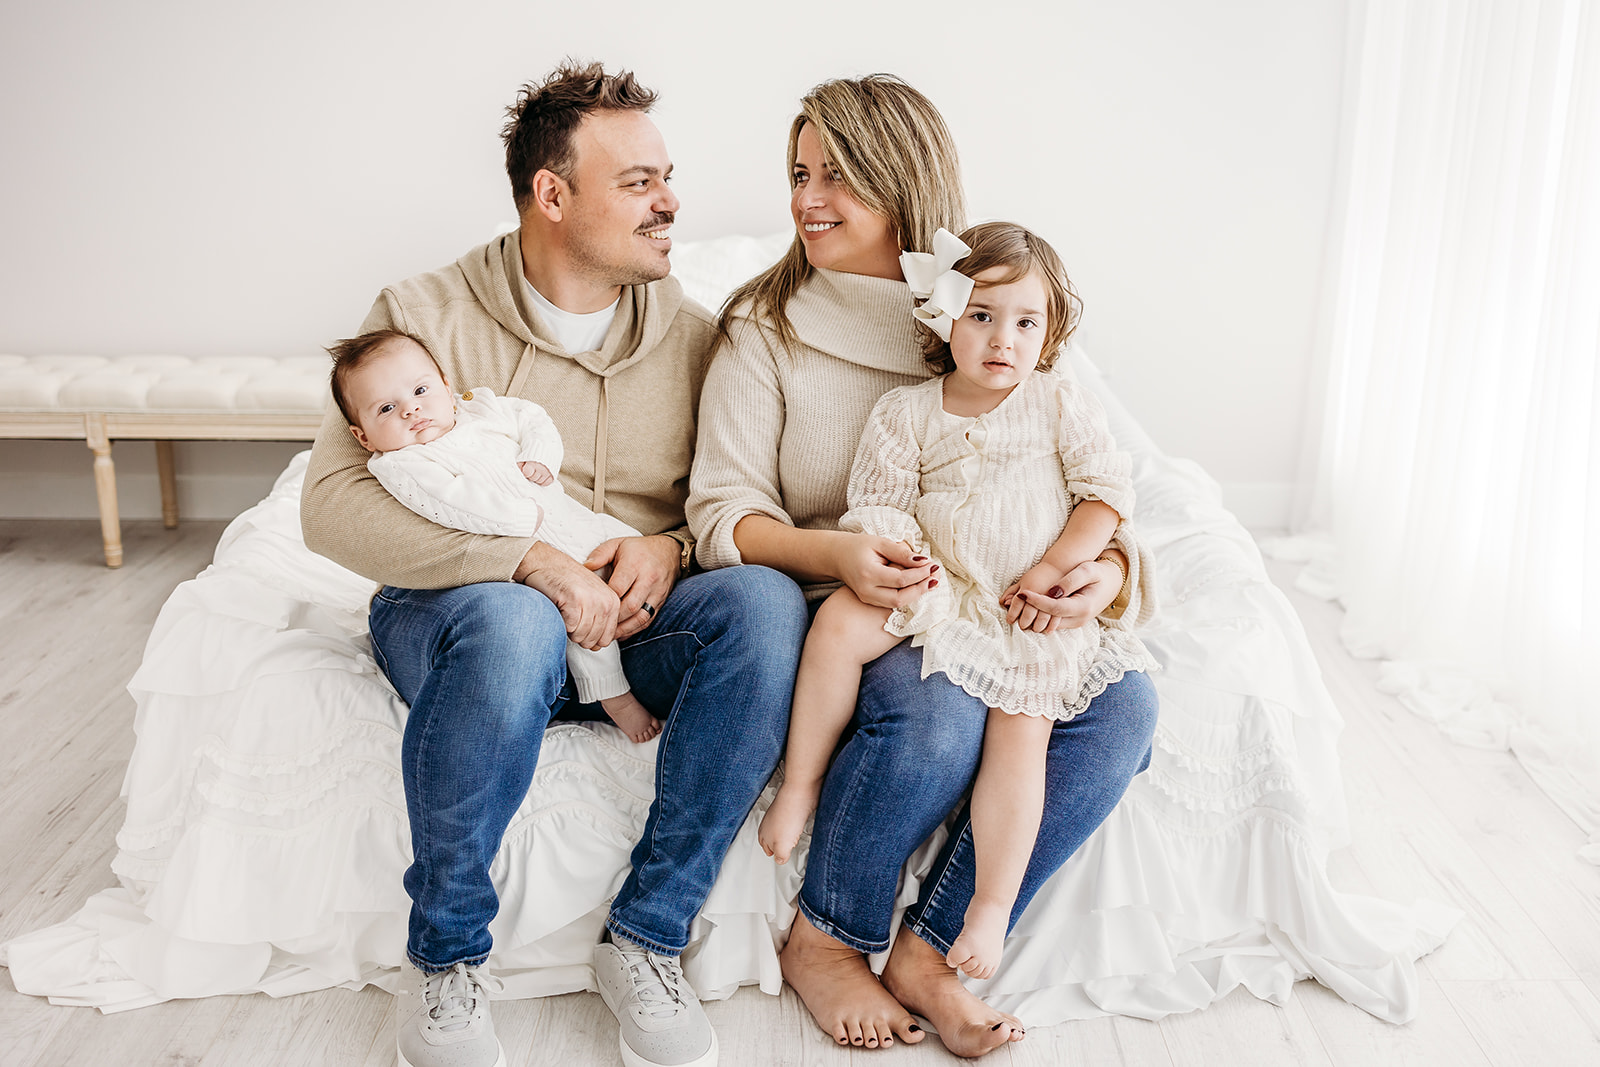 A mom and dad sit on the edge of a bed with their newborn baby and toddler daughter in their laps in a studio before visiting Eau Claire Indoor Playgrounds